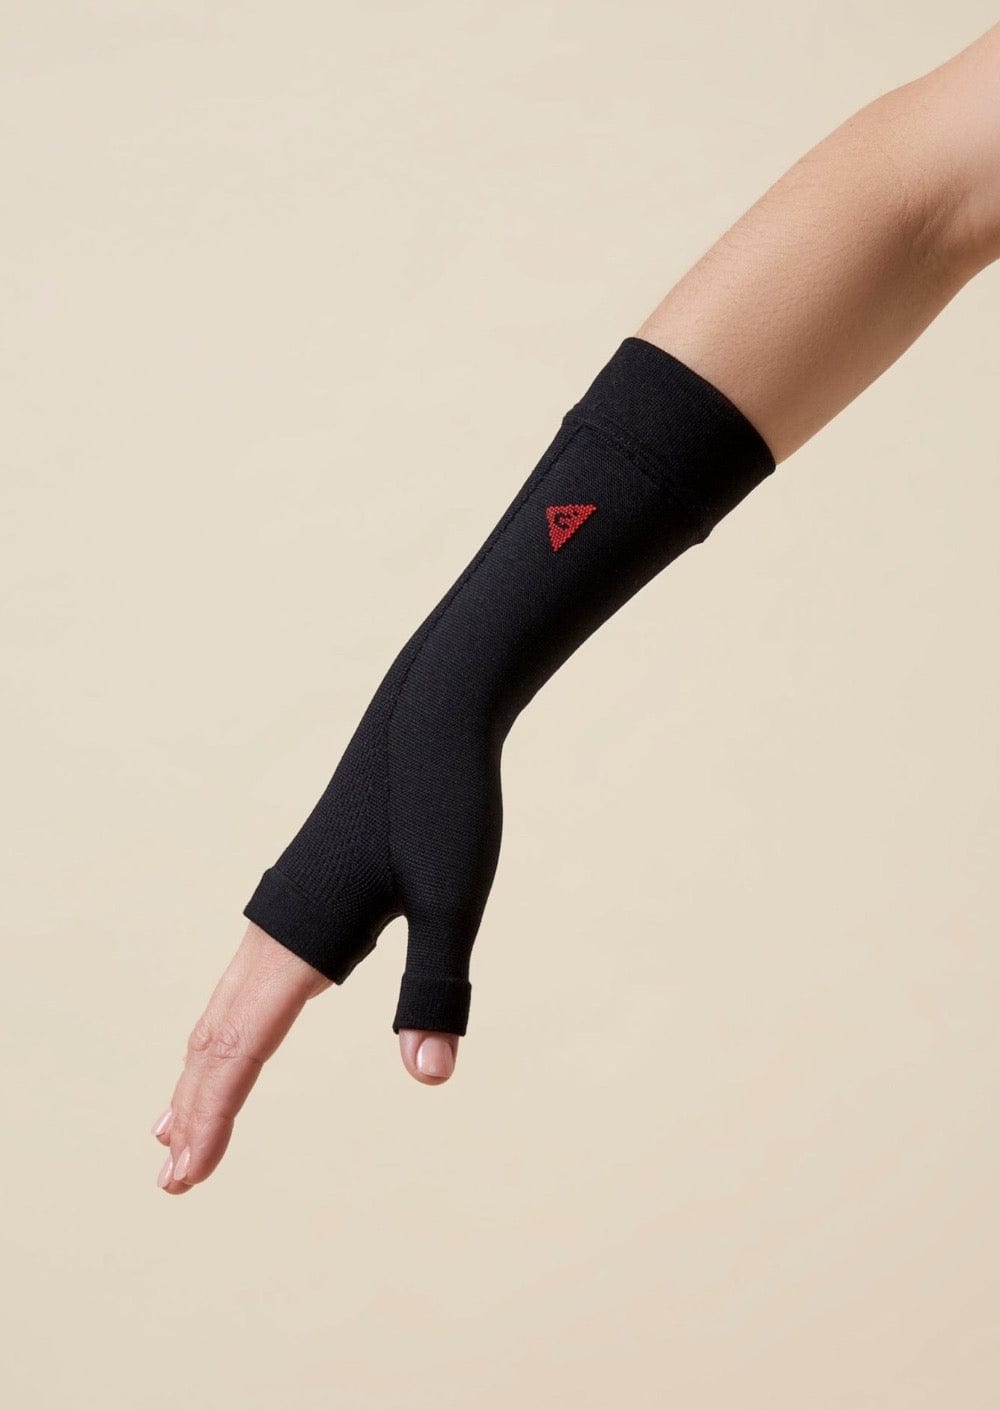 Helping Hand Wrist Compression Sleeve - Single - TheRY